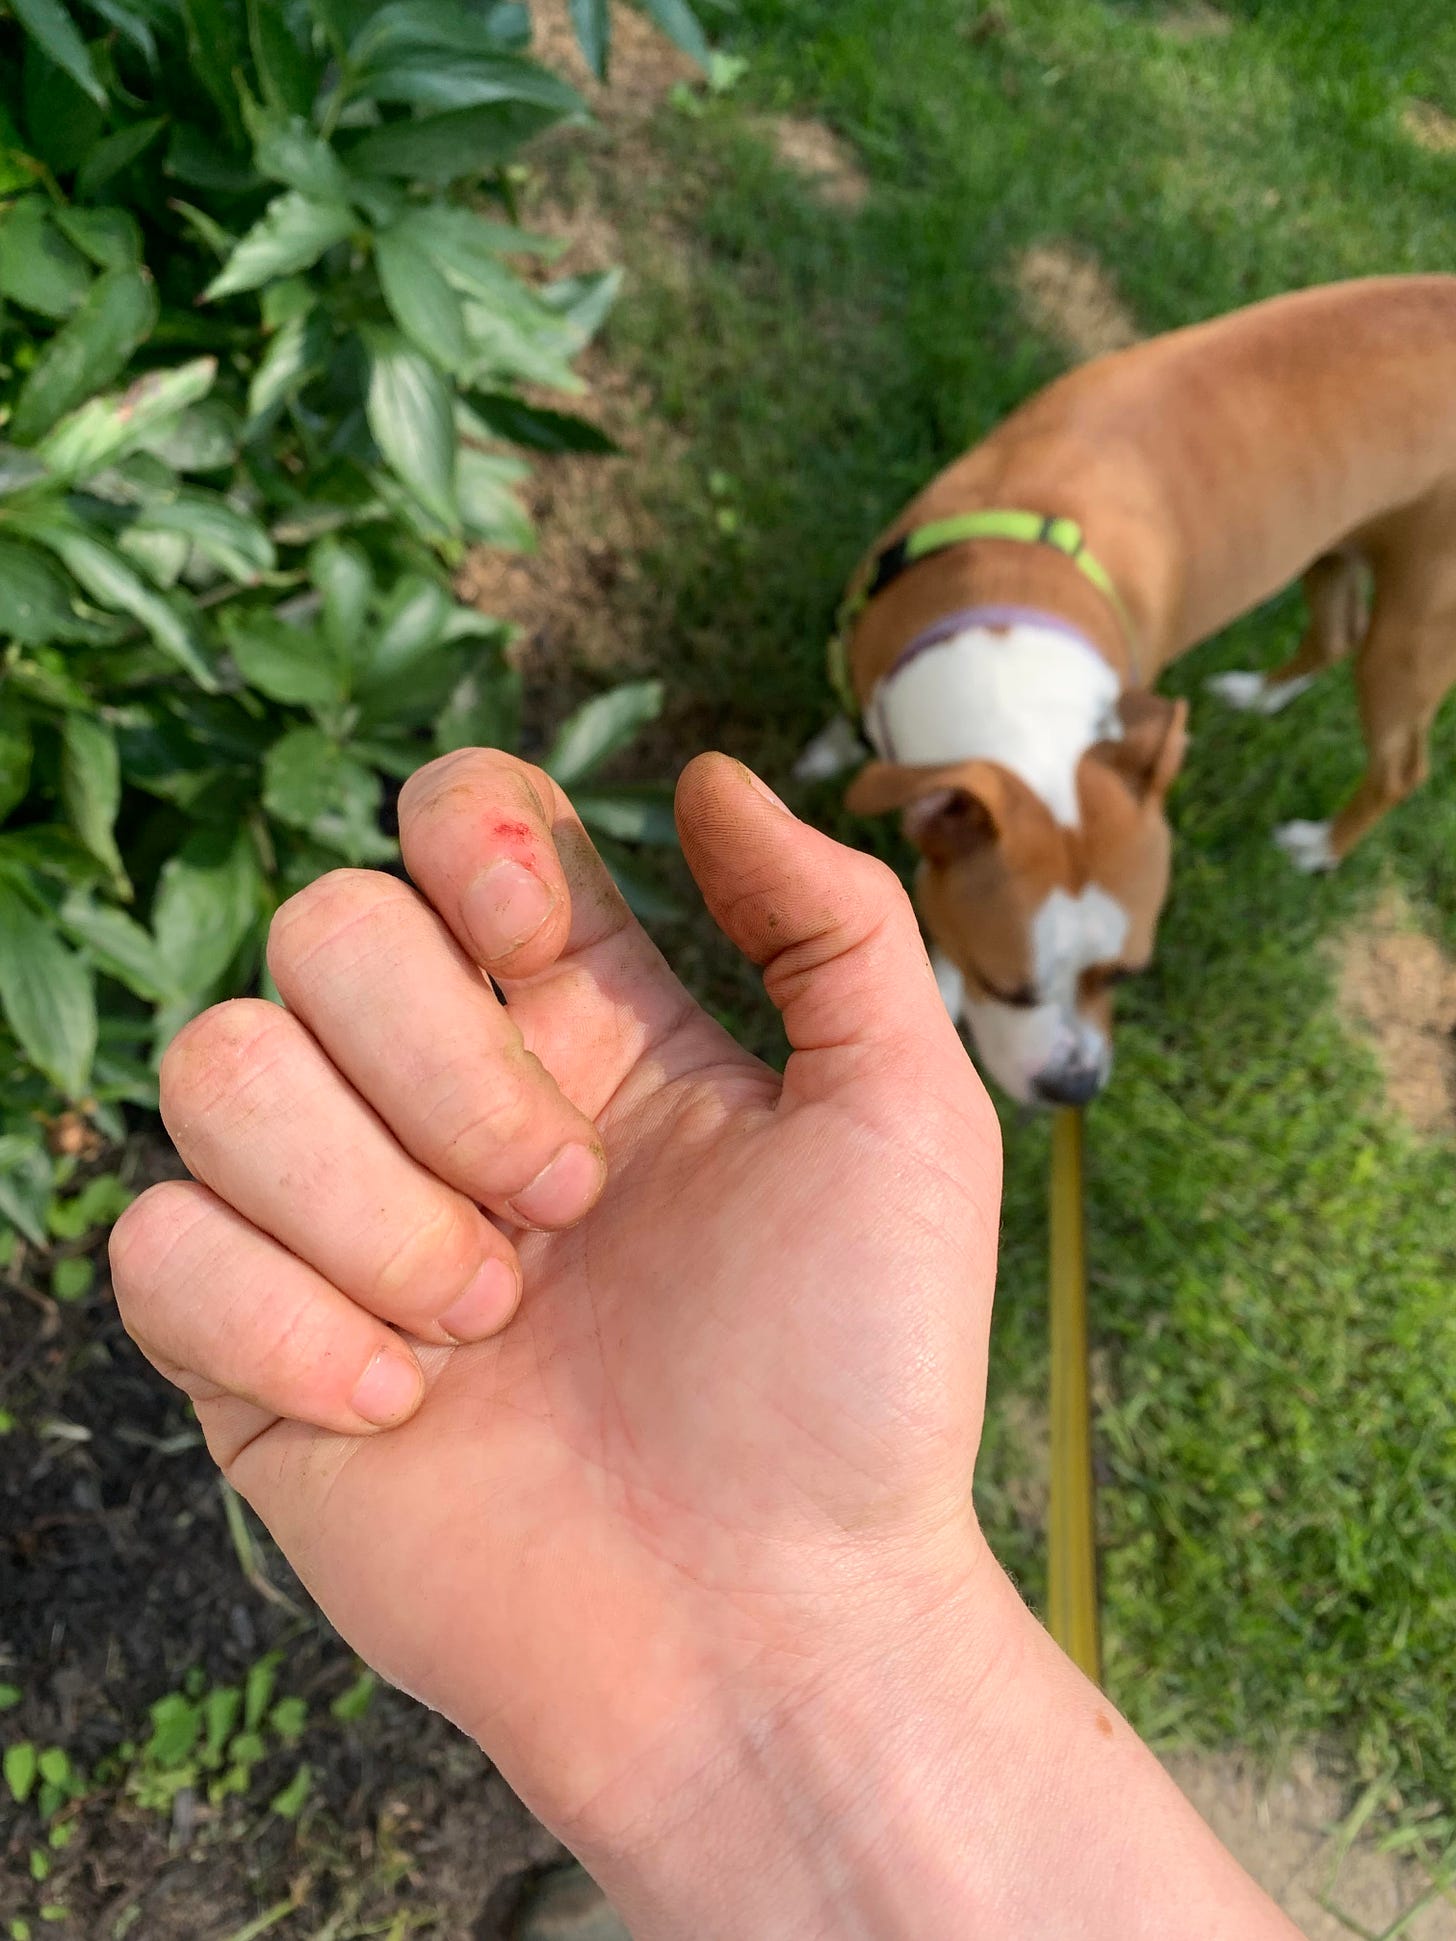 Image Description: Zoe’s right hand is in the foreground of the photo. They are dirty and a spot by their pointer finger is red from where a thorn poked them. Marmalade is on her leash next to a shrub with large glossy green leaves in the background.